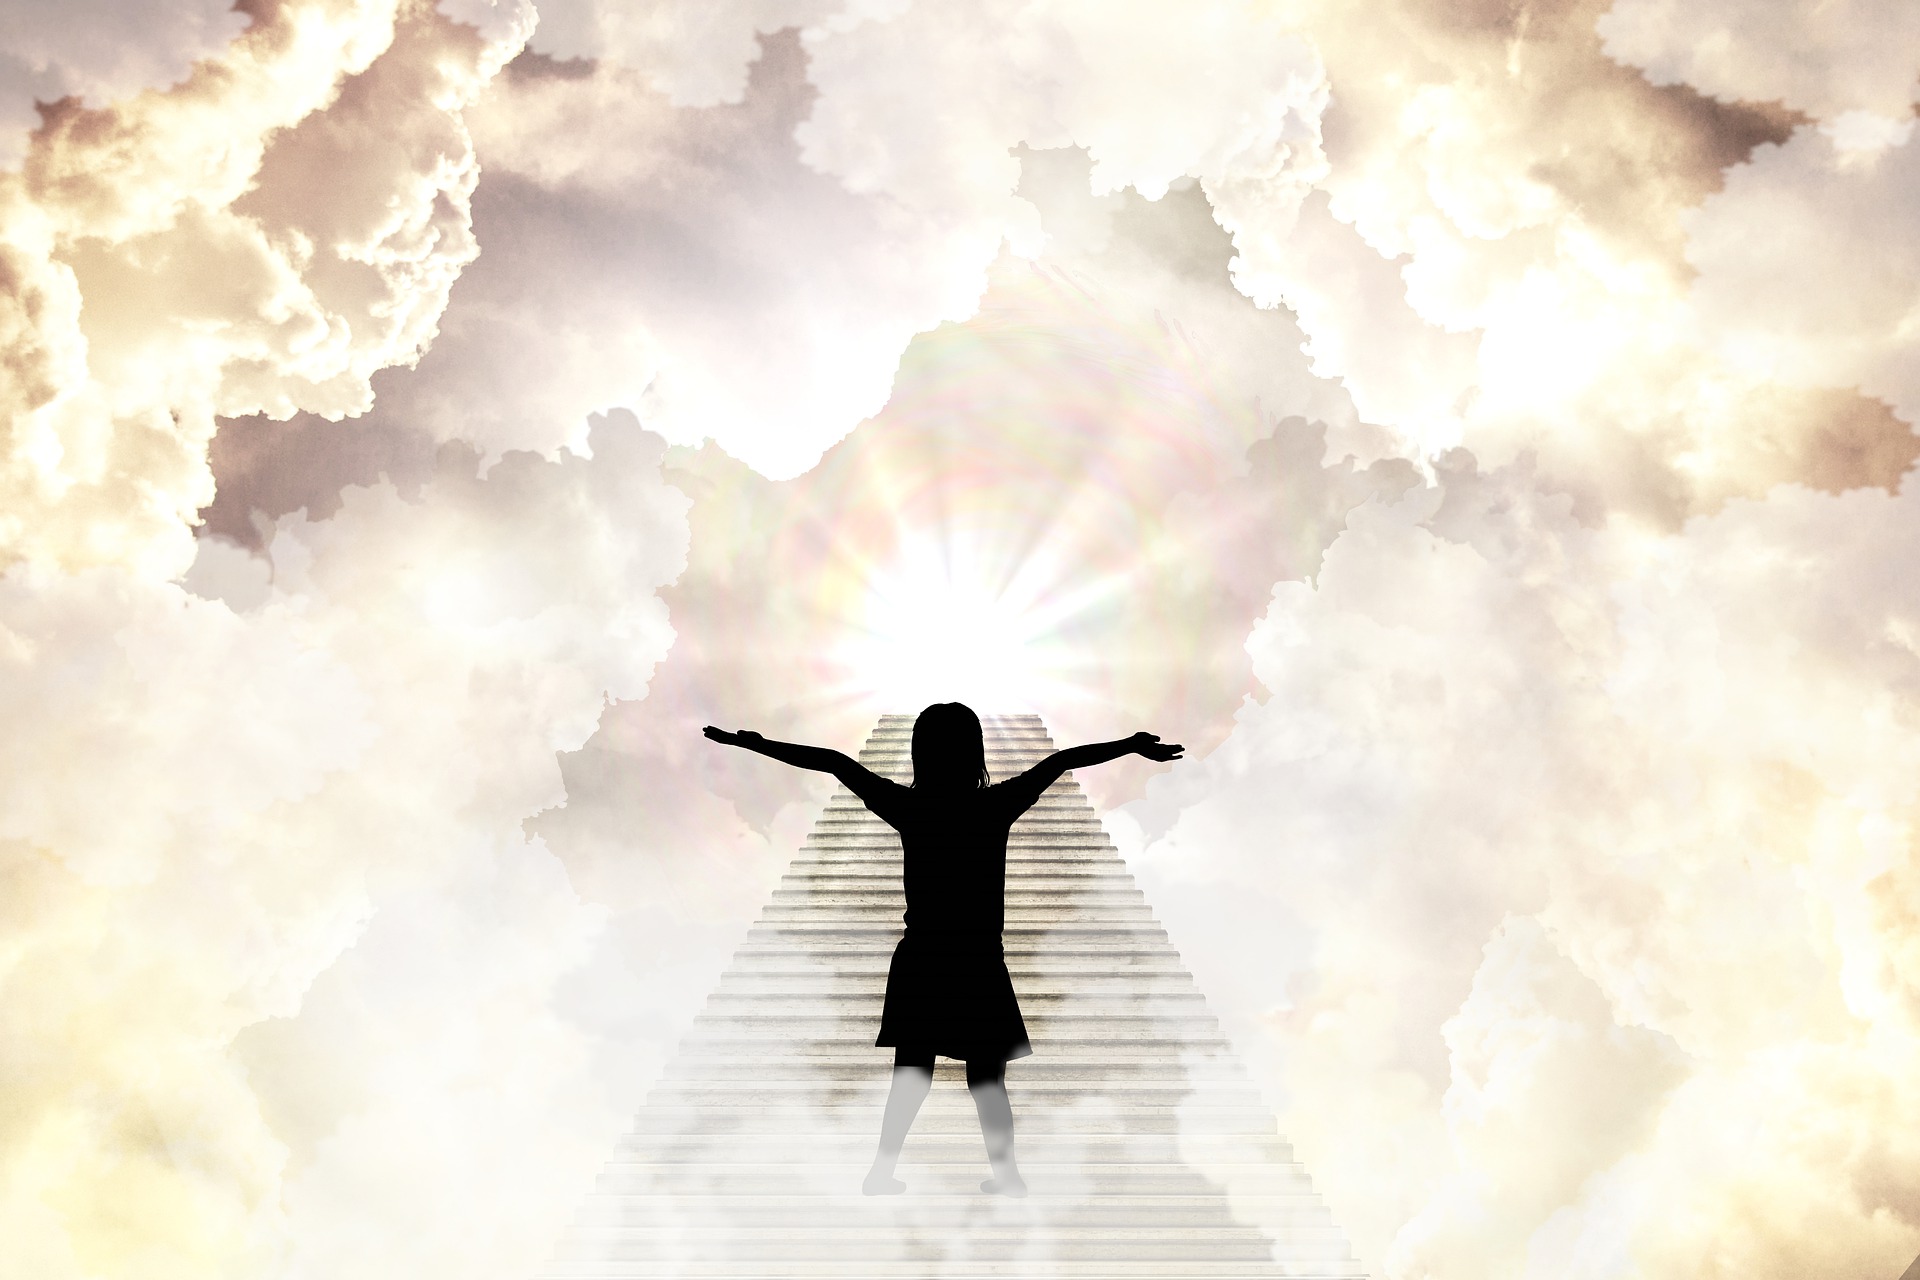 girl on stairs of heaven - eternity: Image by Vicki Nunn from Pixabay